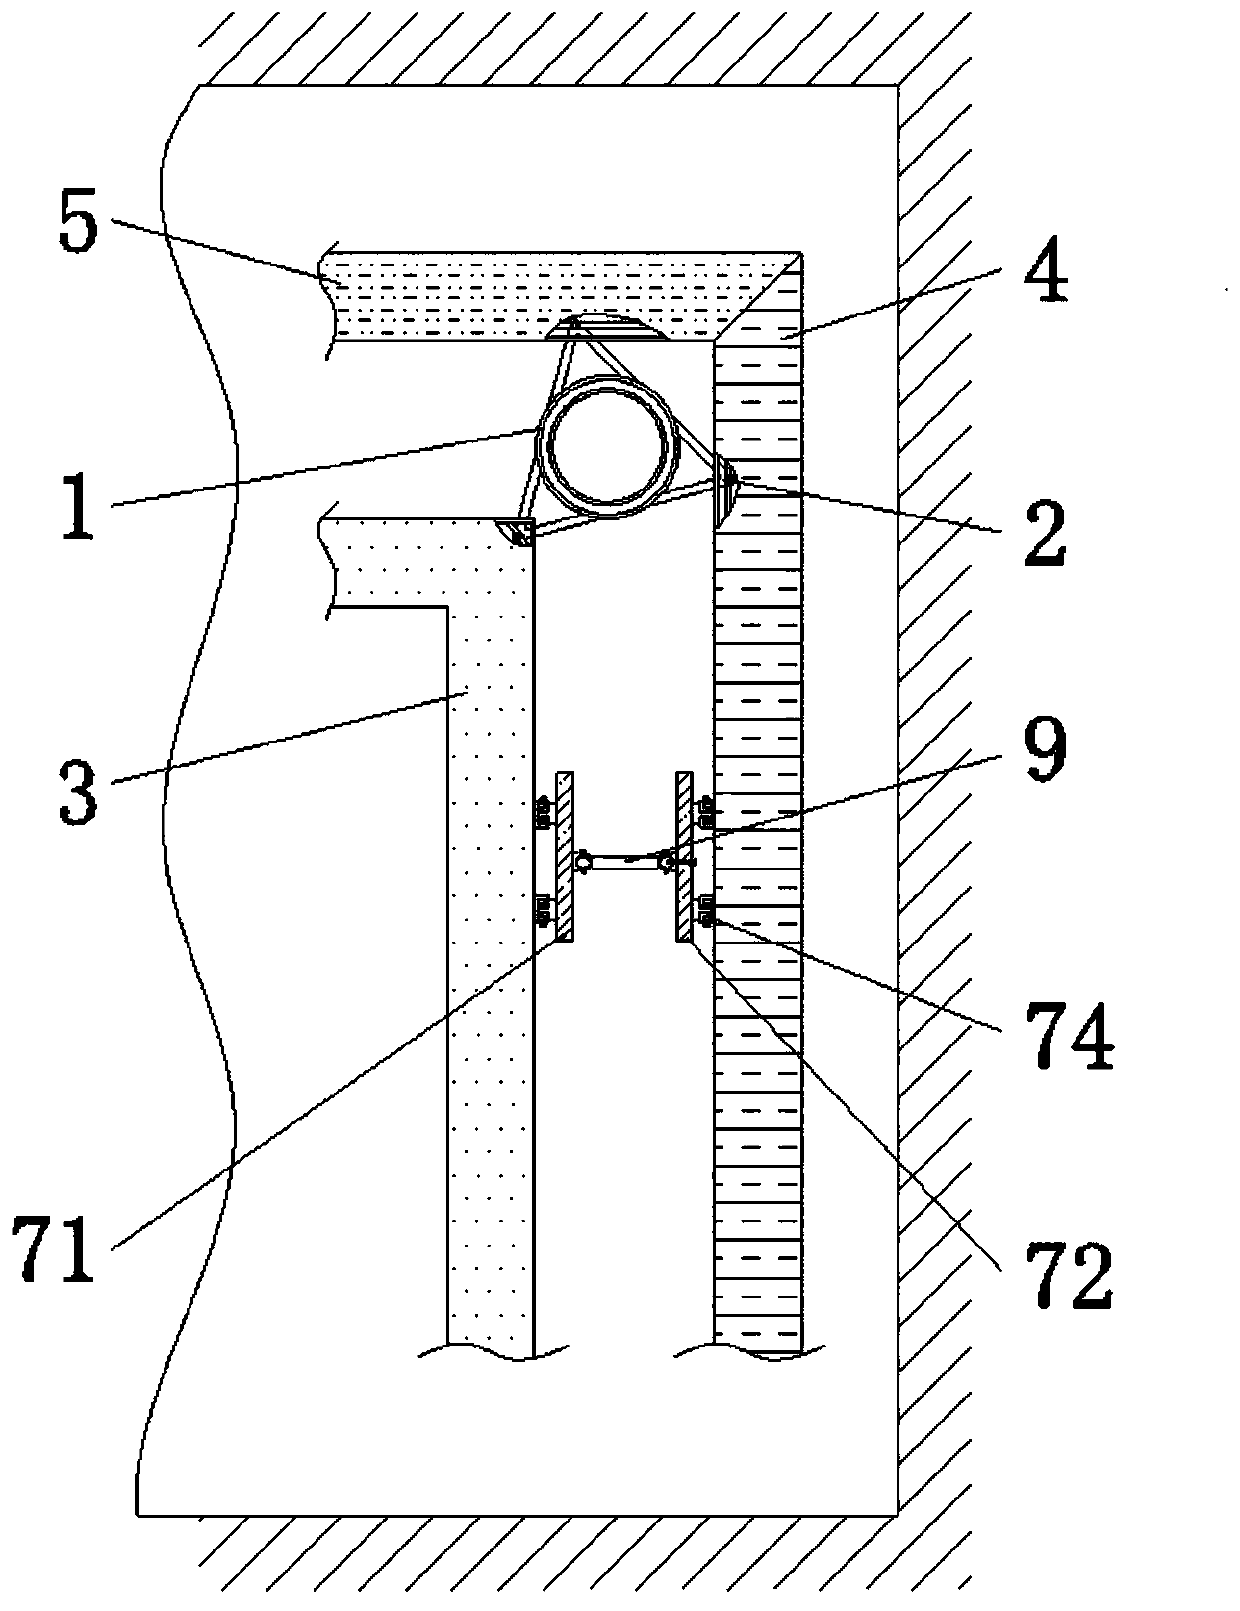 Internal and external wall steel structural keel connecting structure